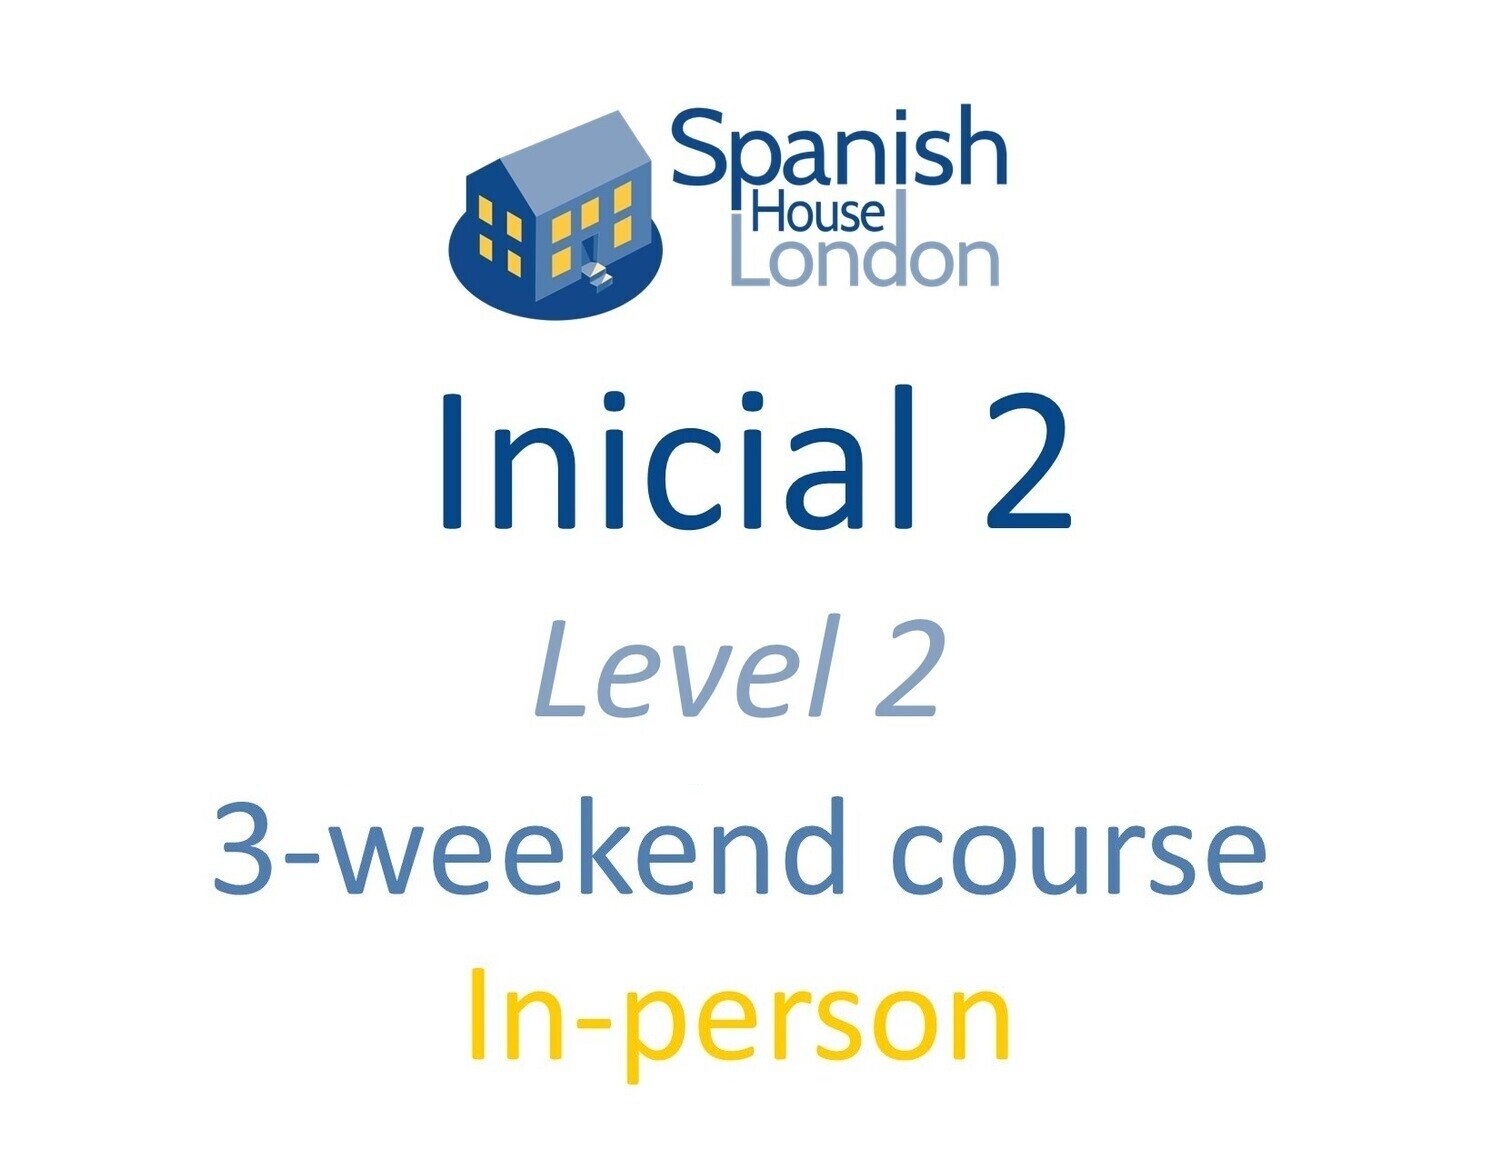 Weekend-Intensive Inicial 2 Course starting on 1st March at 7pm in Clapham North